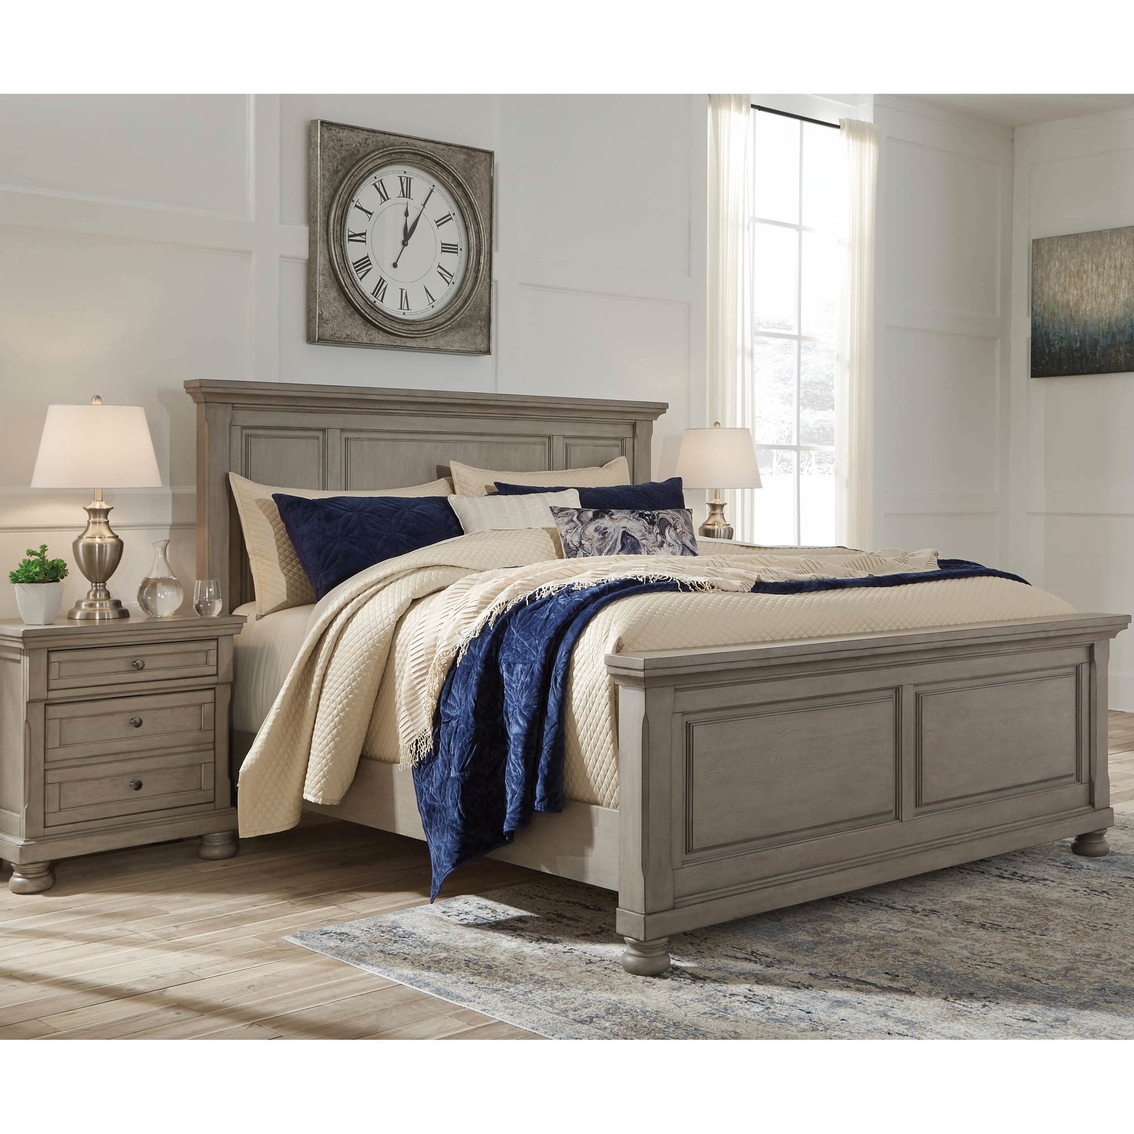 Signature Design by Ashley Lettner Queen Panel Bed - Image 2 of 4